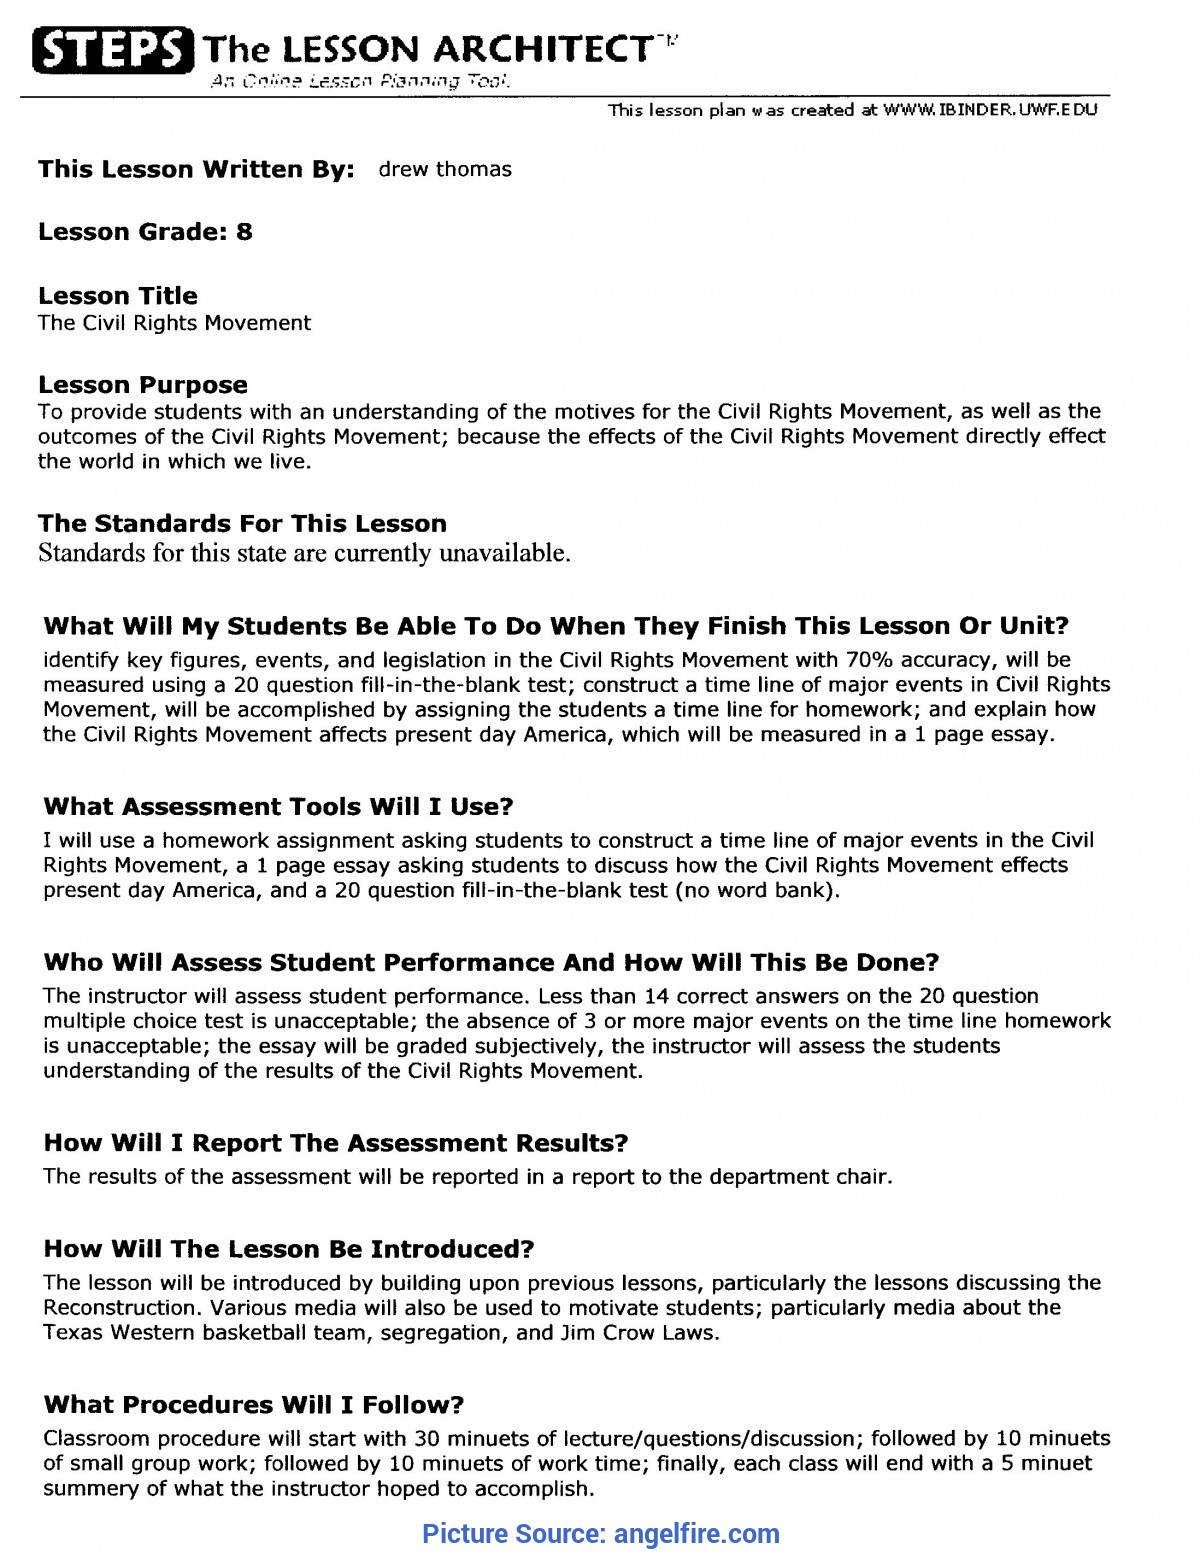 Lesson Plan Example for Elementary Interesting Lesson Plan Example Elementary School My